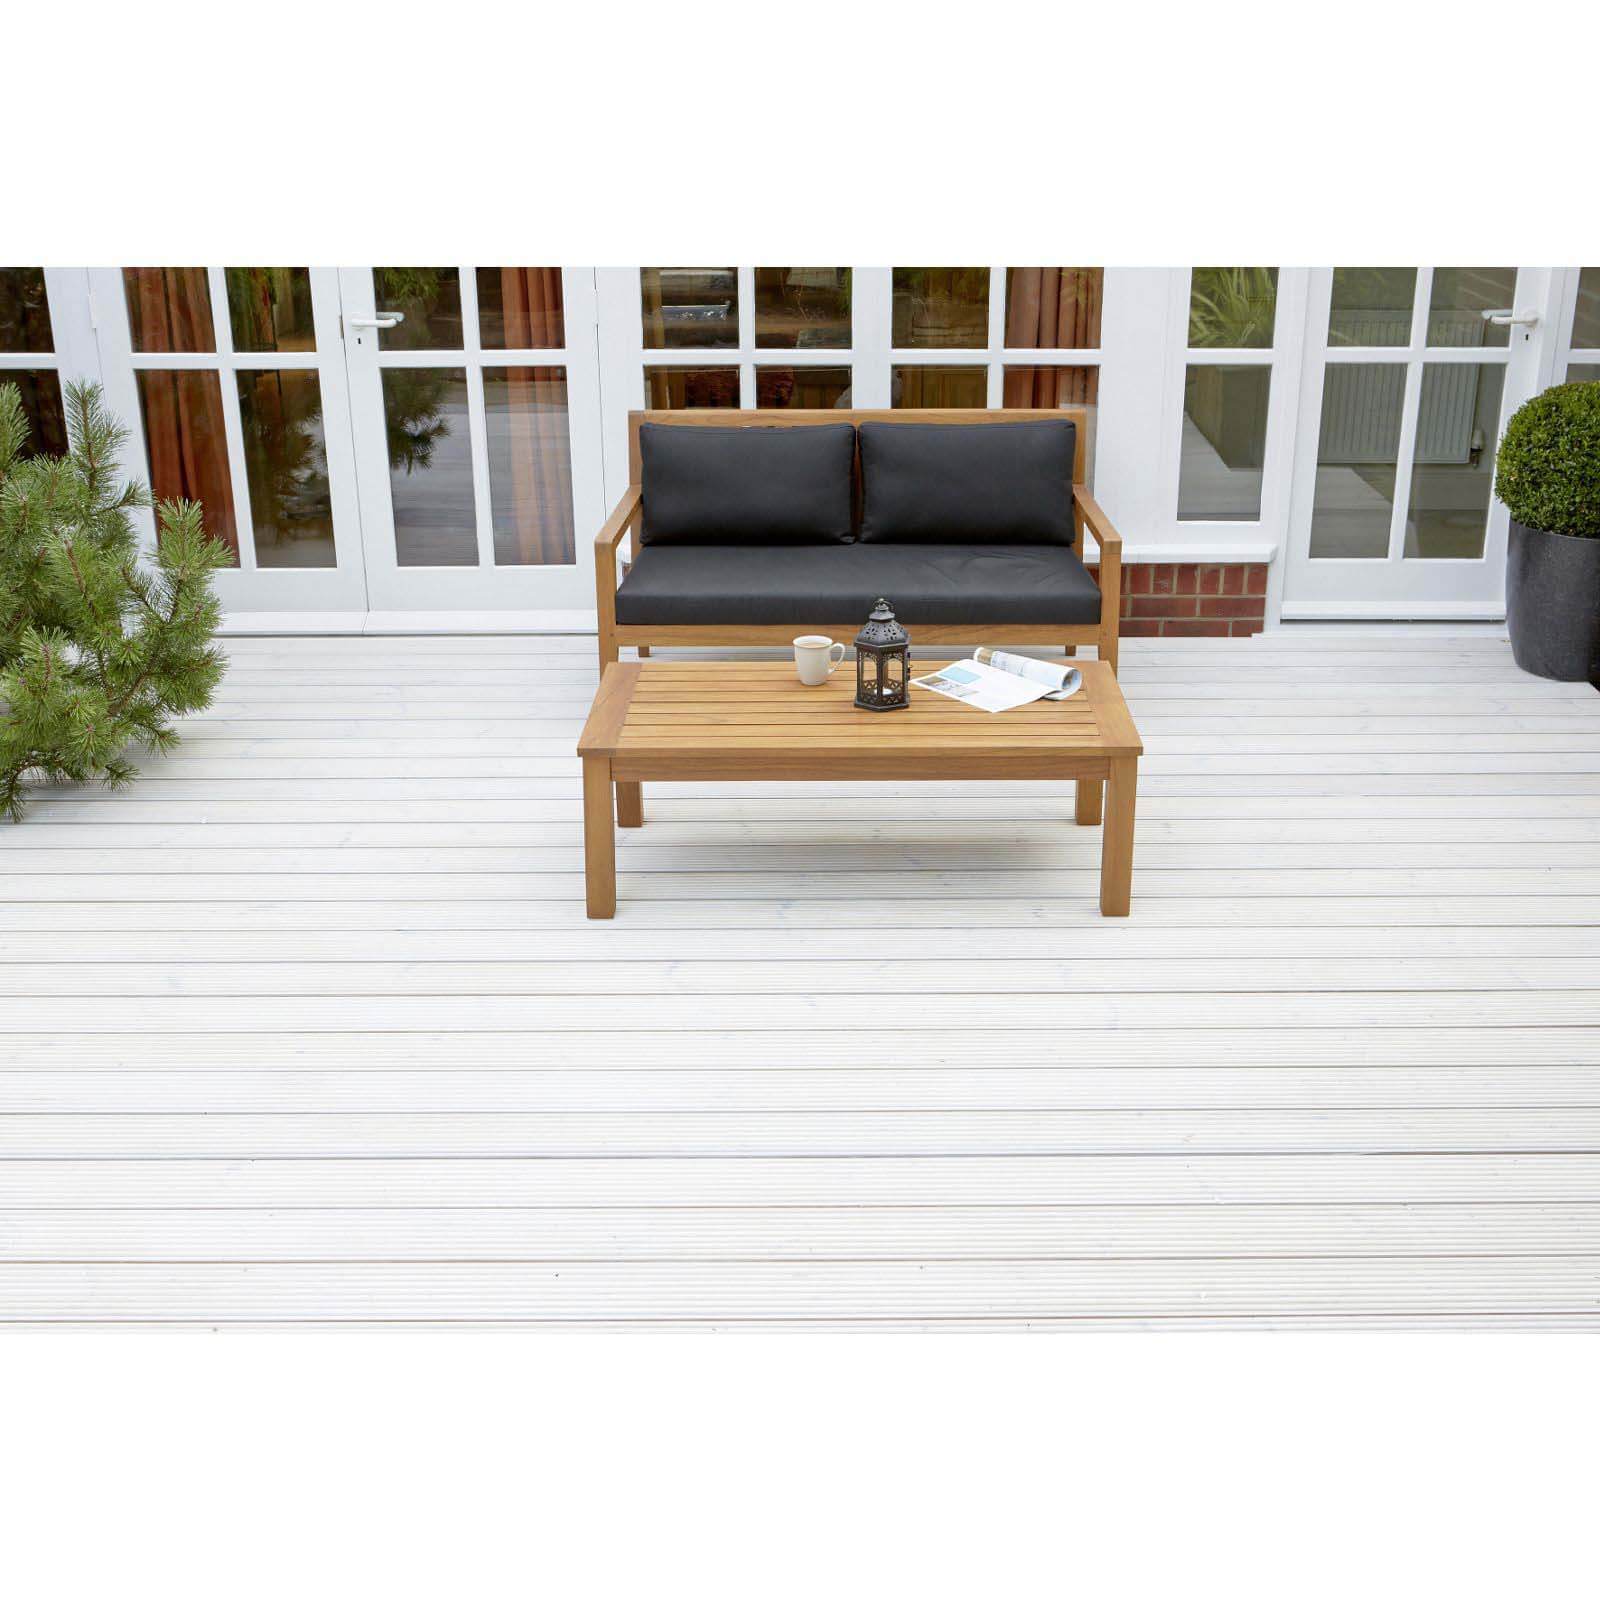 RONSEAL ULT PROTECTION DECK STAIN W/WASH